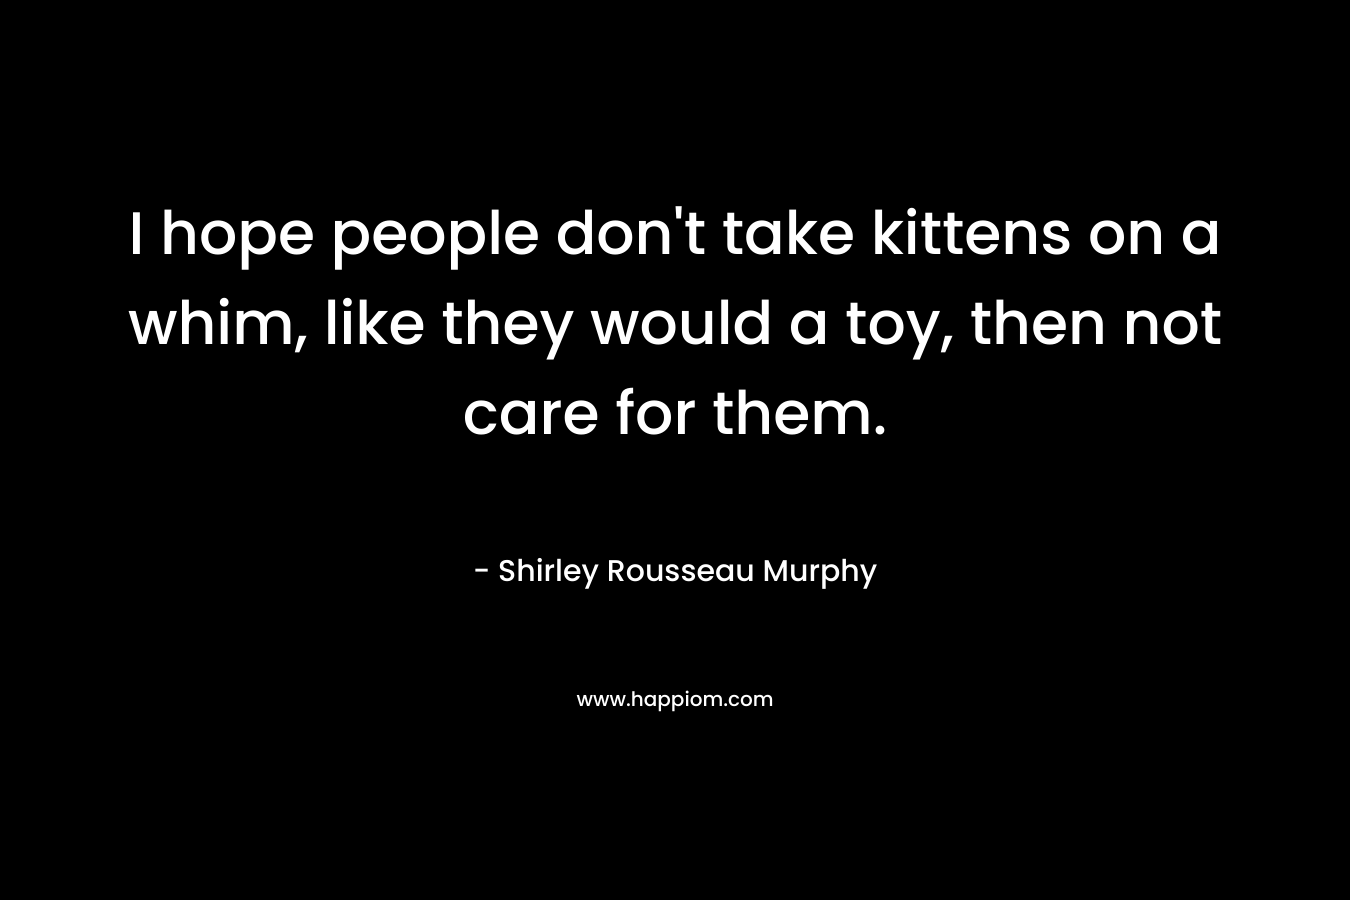 I hope people don’t take kittens on a whim, like they would a toy, then not care for them. – Shirley Rousseau Murphy